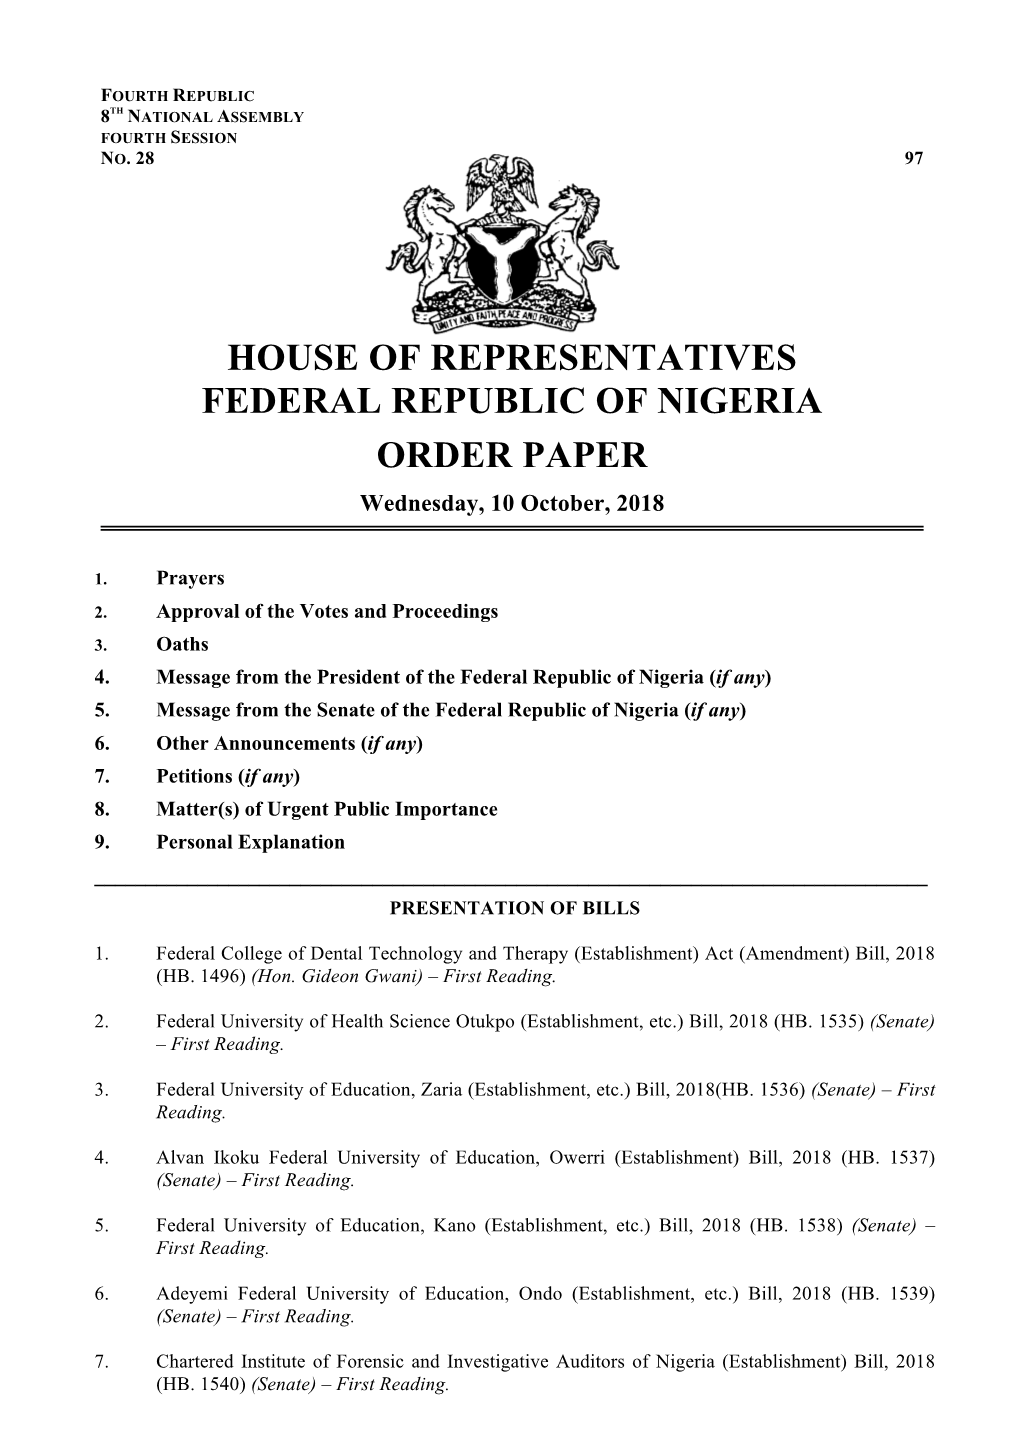 HOUSE of REPRESENTATIVES FEDERAL REPUBLIC of NIGERIA ORDER PAPER Wednesday, 10 October, 2018